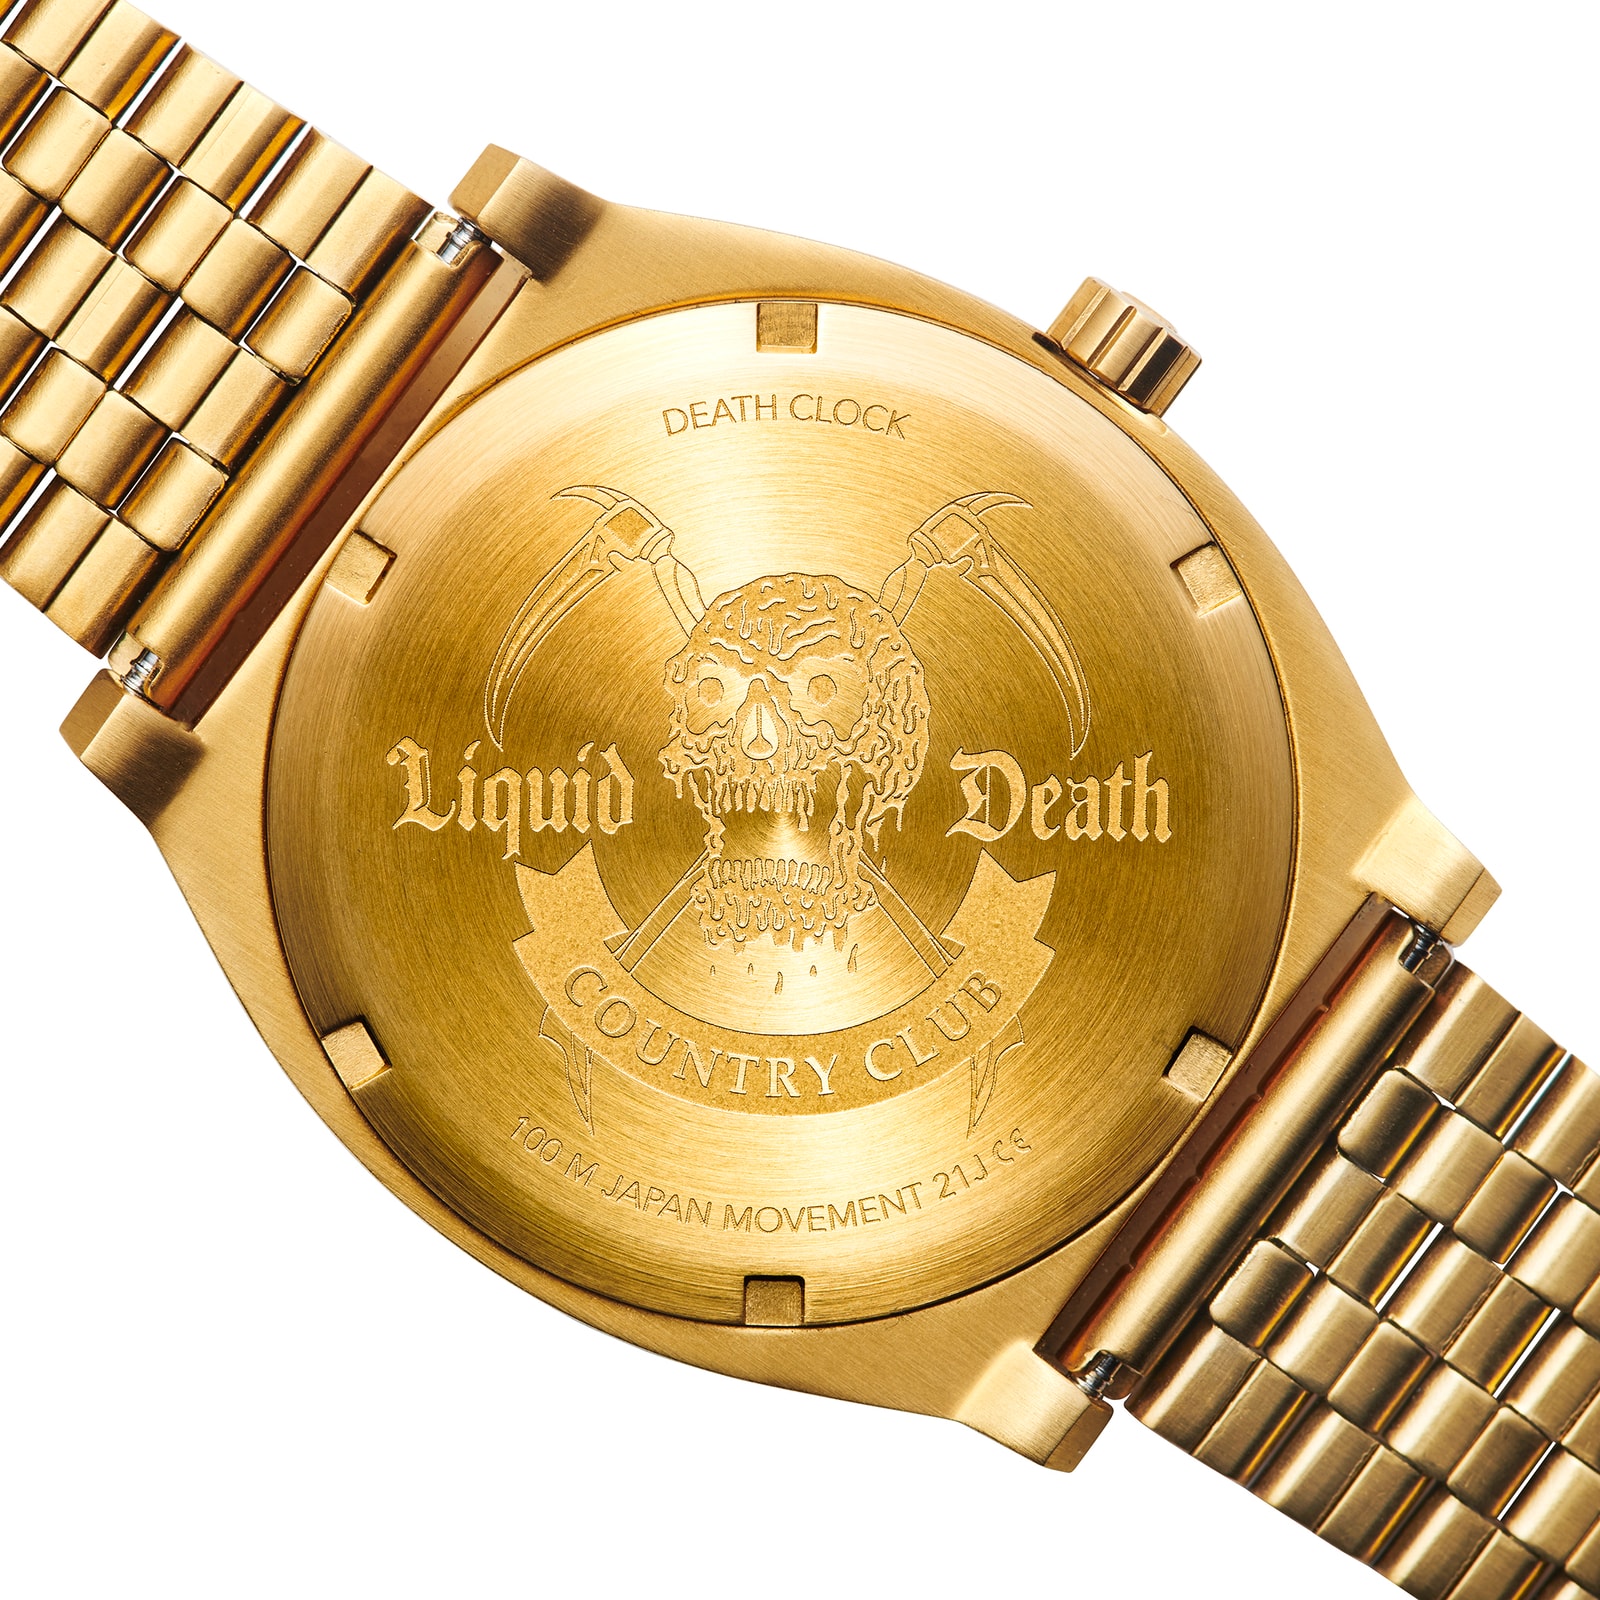 Liquid Death x Nixon Collaboration Watch Available Now!